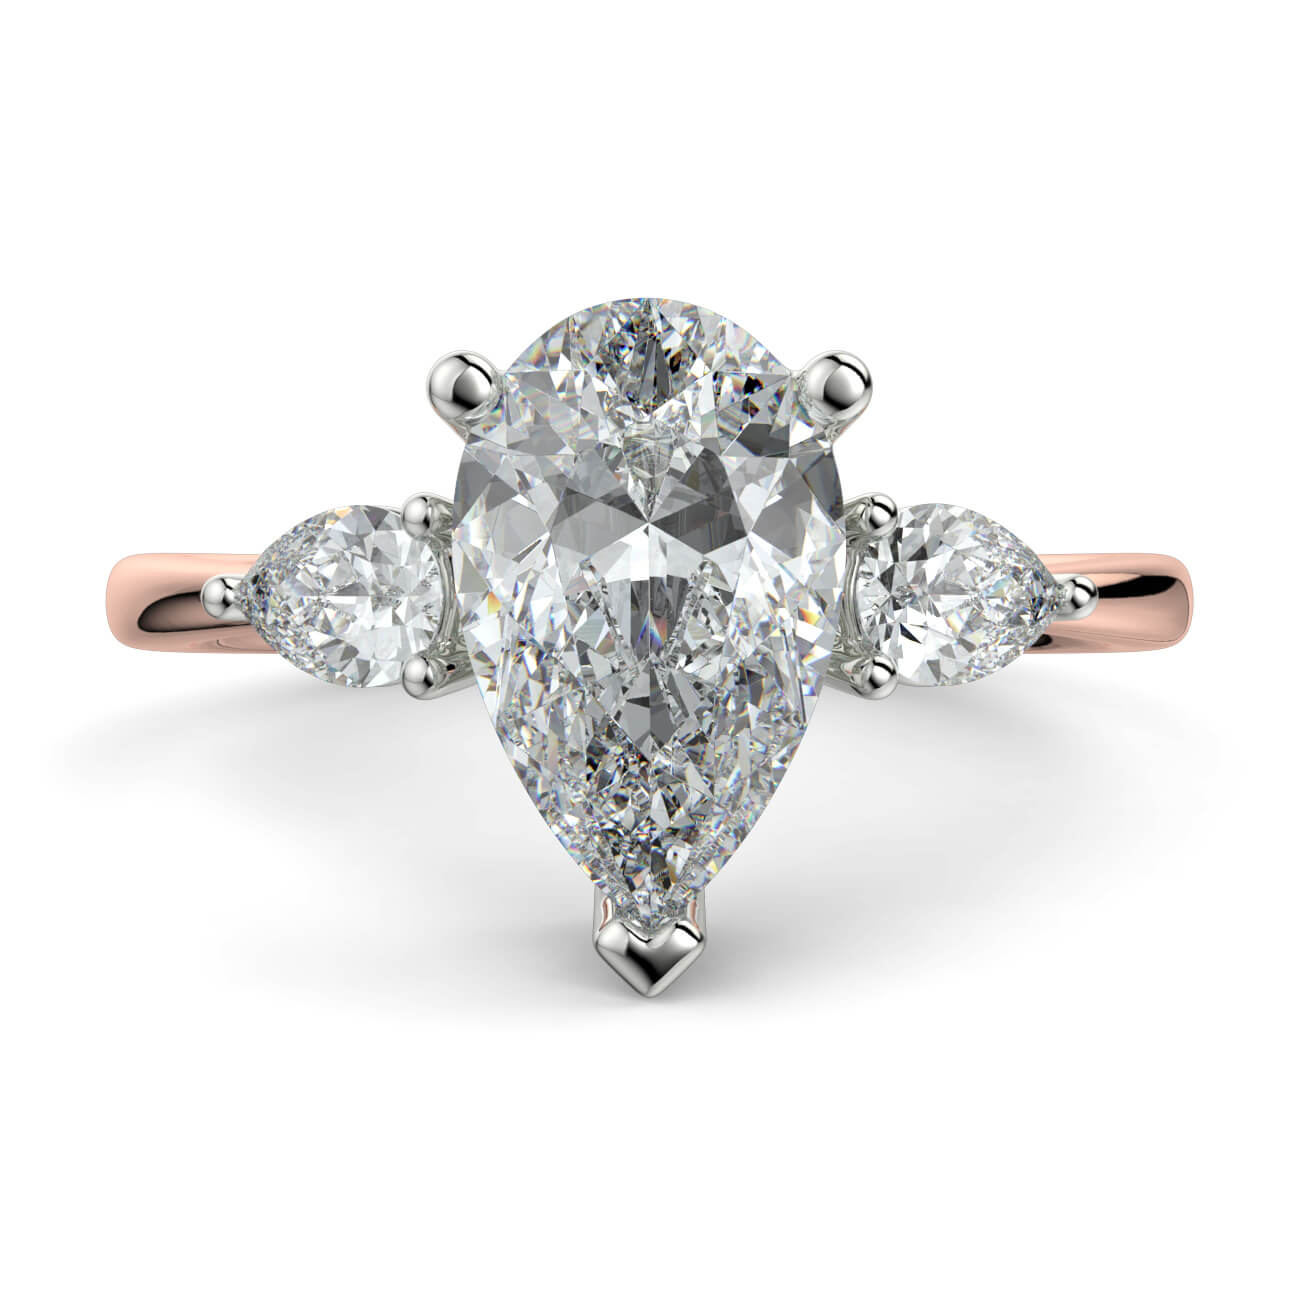 Pear Shape Diamond Ring With Pear Shape Side Diamonds In Rose and White Gold – Australian Diamond Network